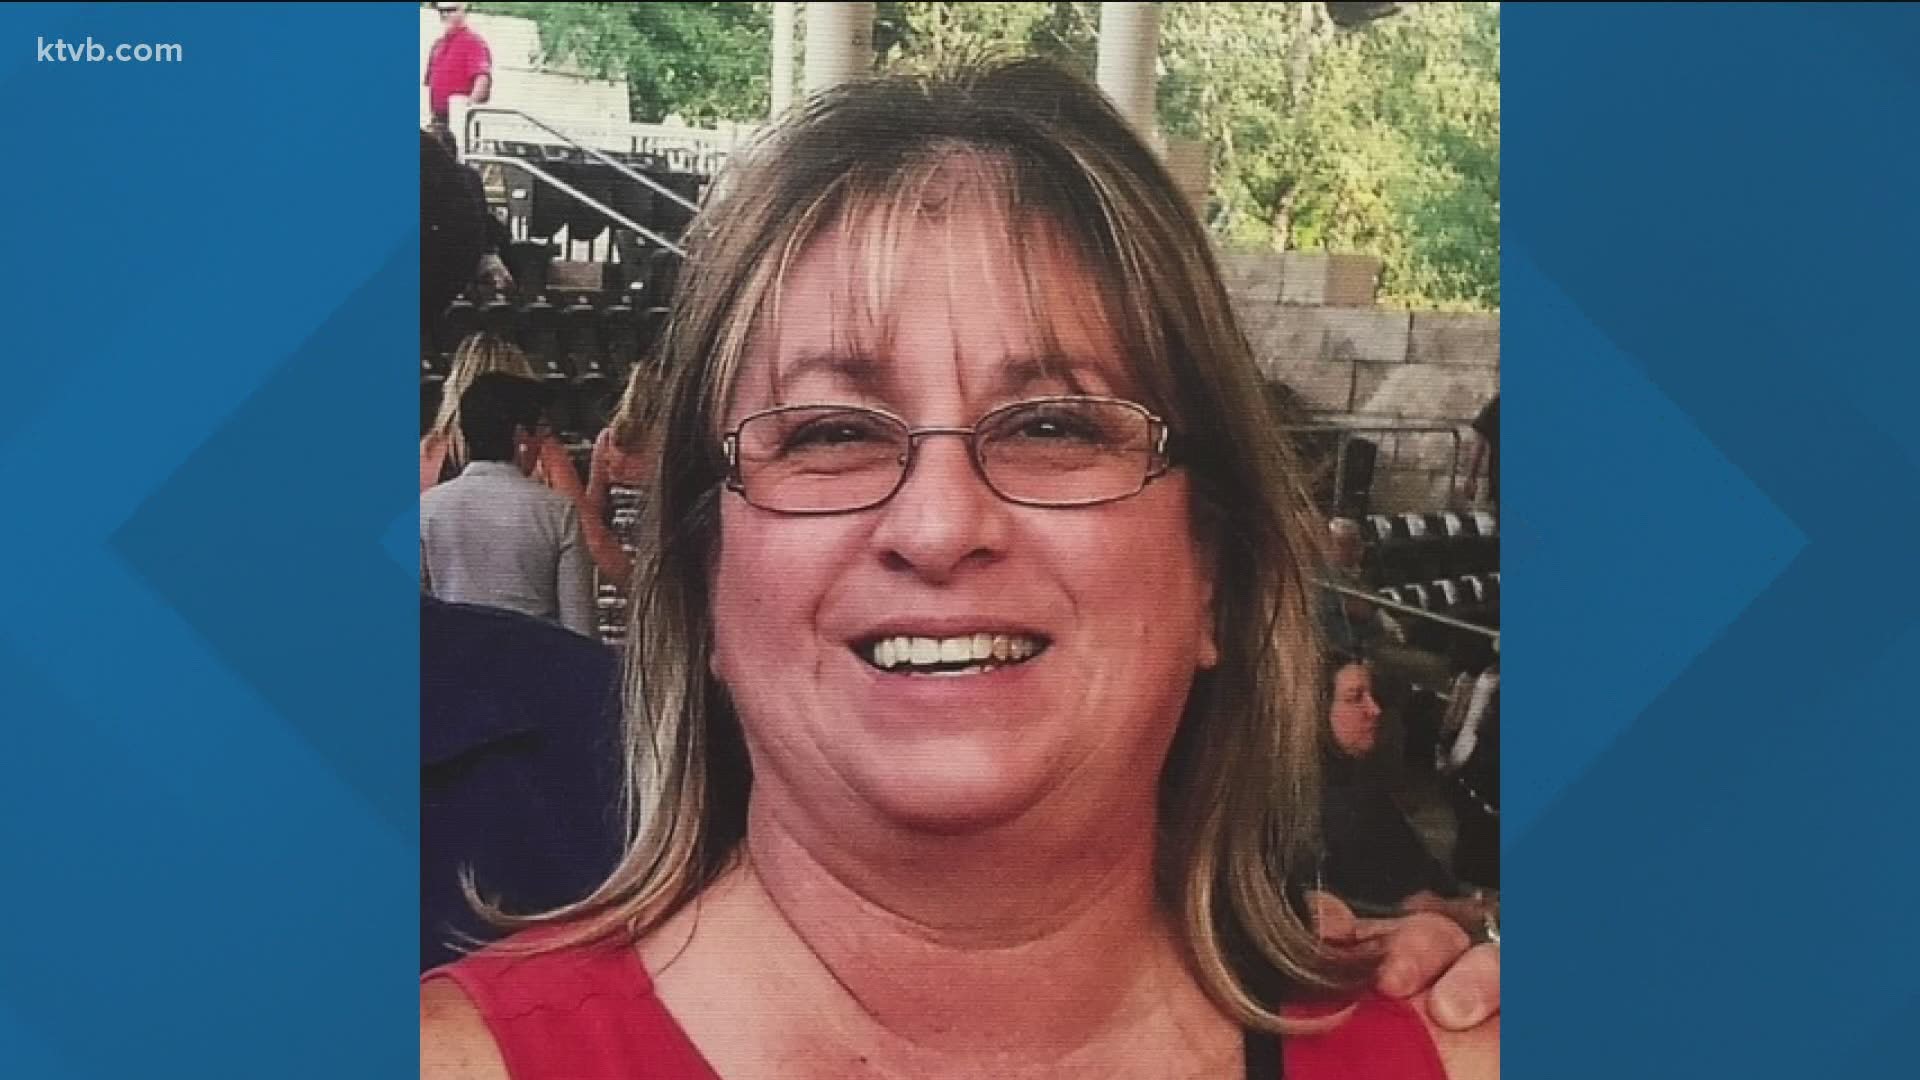 Deborah Hendrichs went missing on January 11 after running out of gas on Interstate 84 in eastern Oregon.